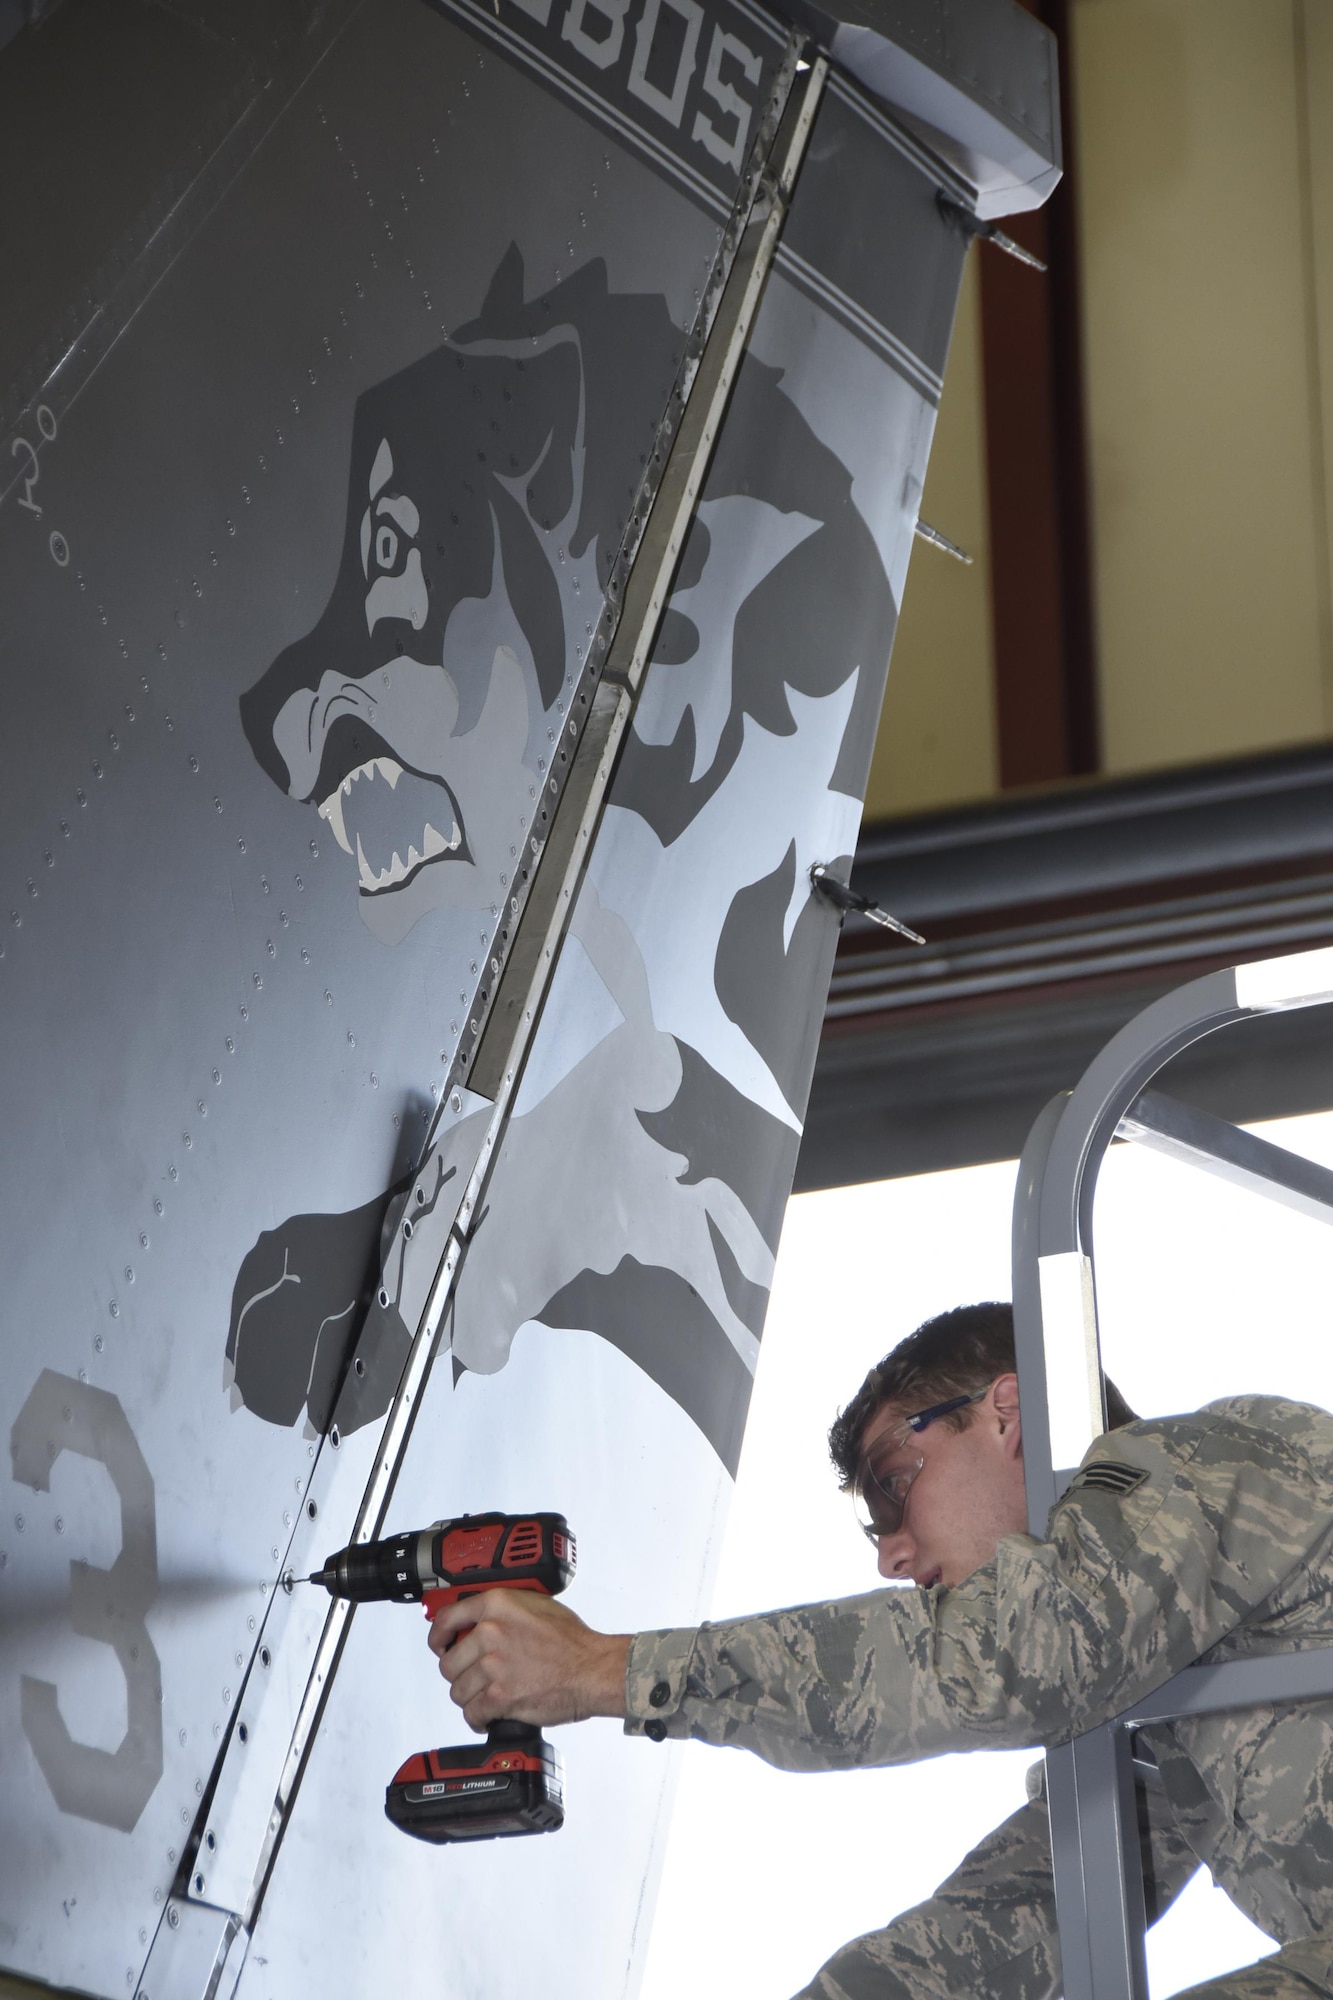 Senior Airman Nicholas Jones, 114th Aircraft Maintenance Squadron sheet metal mechanic, removed a panel from the tail of an F-16 during the de-paneling Phase of a phase maintenance inspection at Joe Foss Field, July 8, 2017.  Each aircraft is required to go through a phase inspection every 400 flight hours to ensure all systems are functioning with in Air Force regulations.  (U.S. Air National Guard photo by Master Sgt. Christopher Stewart/Released)